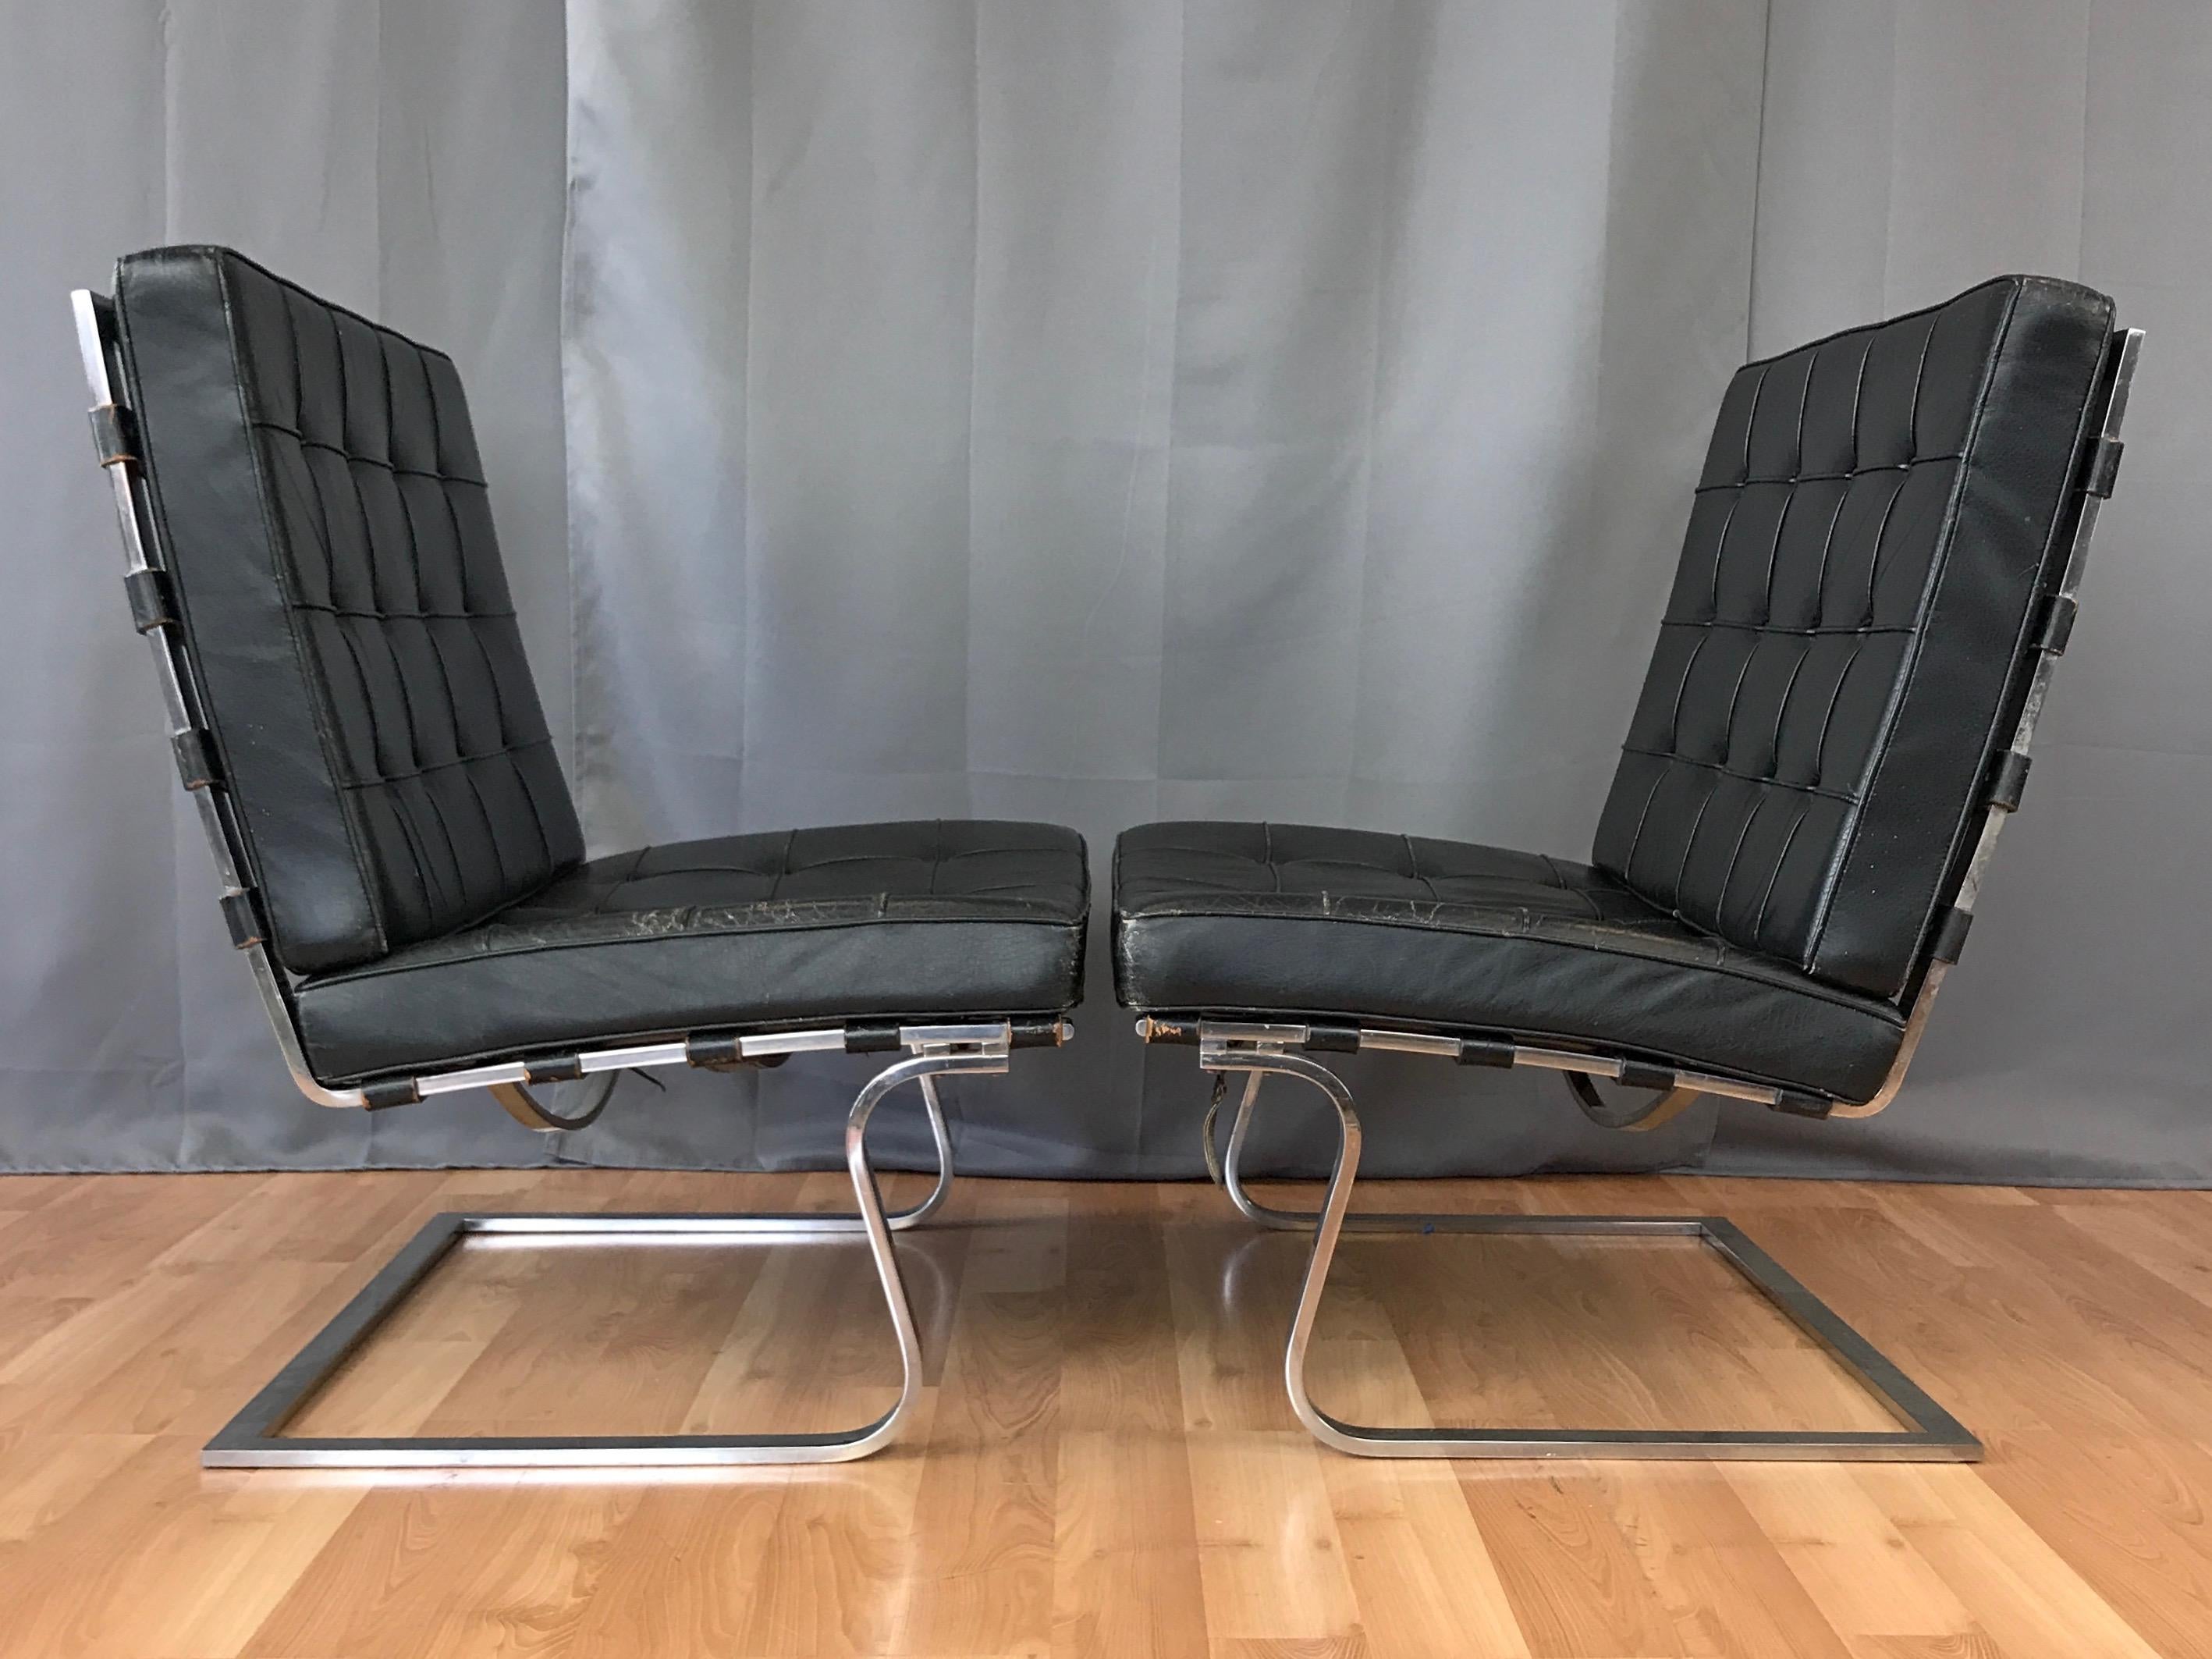 Polished Pair of Mies van der Rohe for Knoll International MR70 Tugendhat Chairs, 1960s